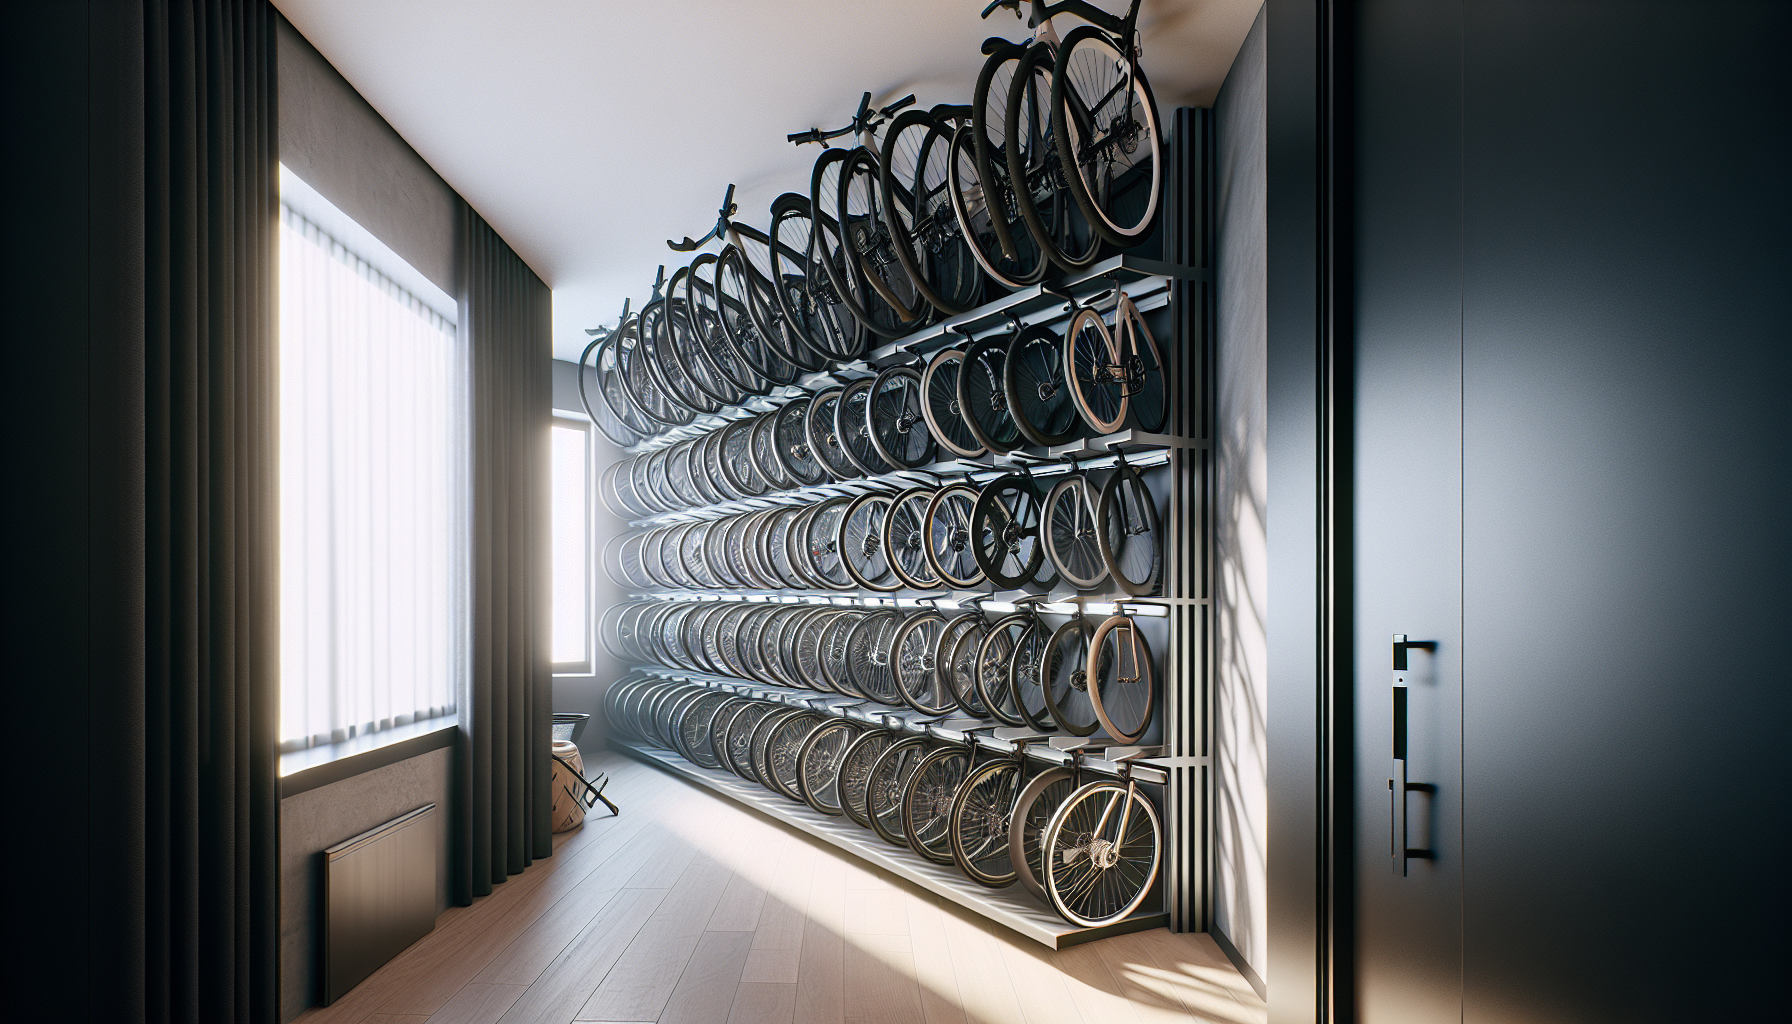 Evaluation of vertical storage space for bicycles